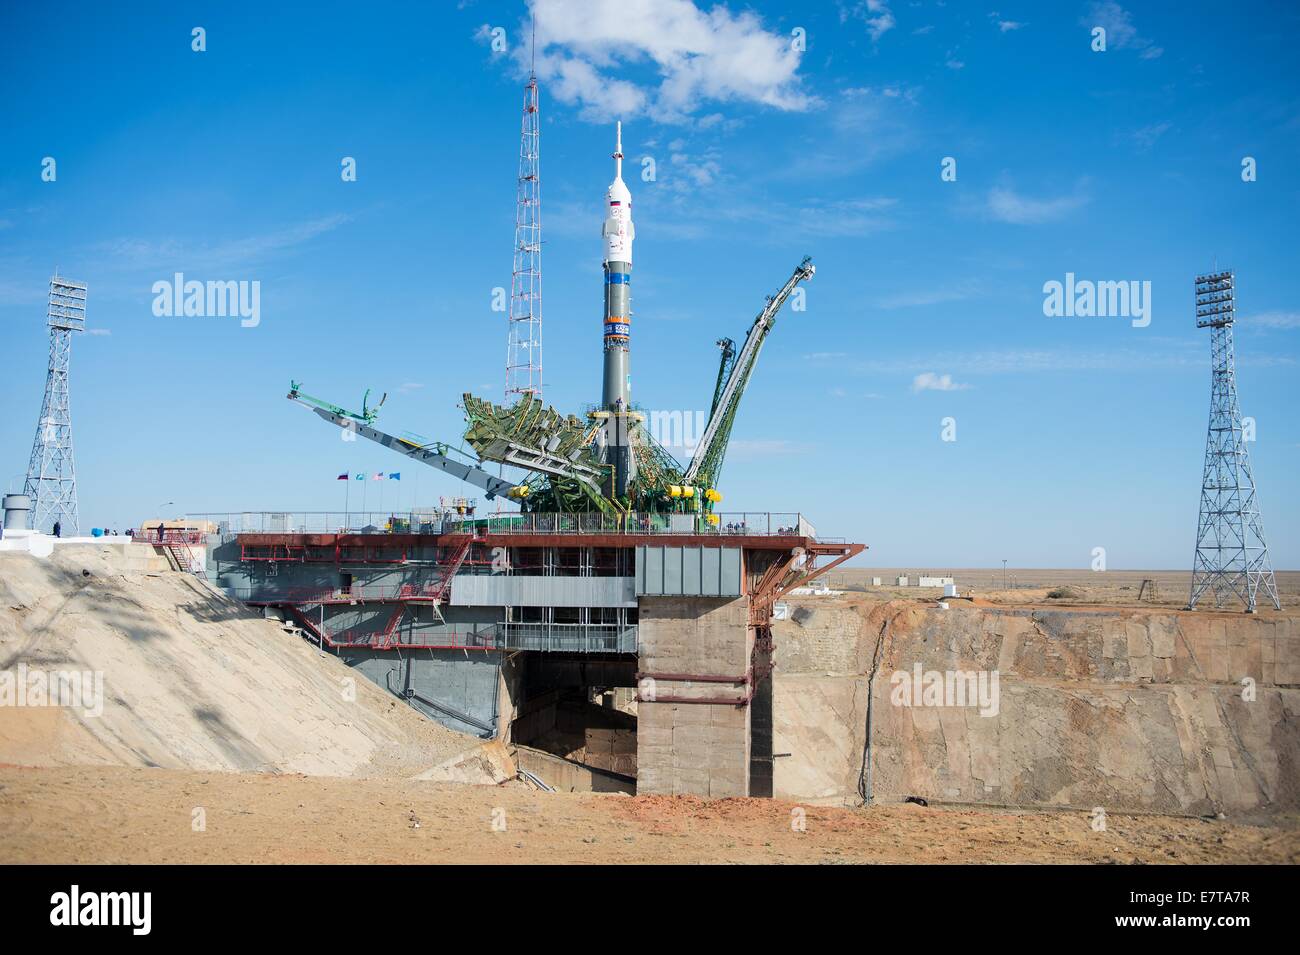 The gantry arms begin to close around the Soyuz TMA-14M spacecraft after being lifted into position on the launch pad at the Baikonur Cosmodrome September 23, 2014 in Kazakhstan. Launch of the Soyuz rocket is scheduled for Sept. 26 and will carry Expedition 41 crew to the International Space Station for a five and a half month mission. Stock Photo